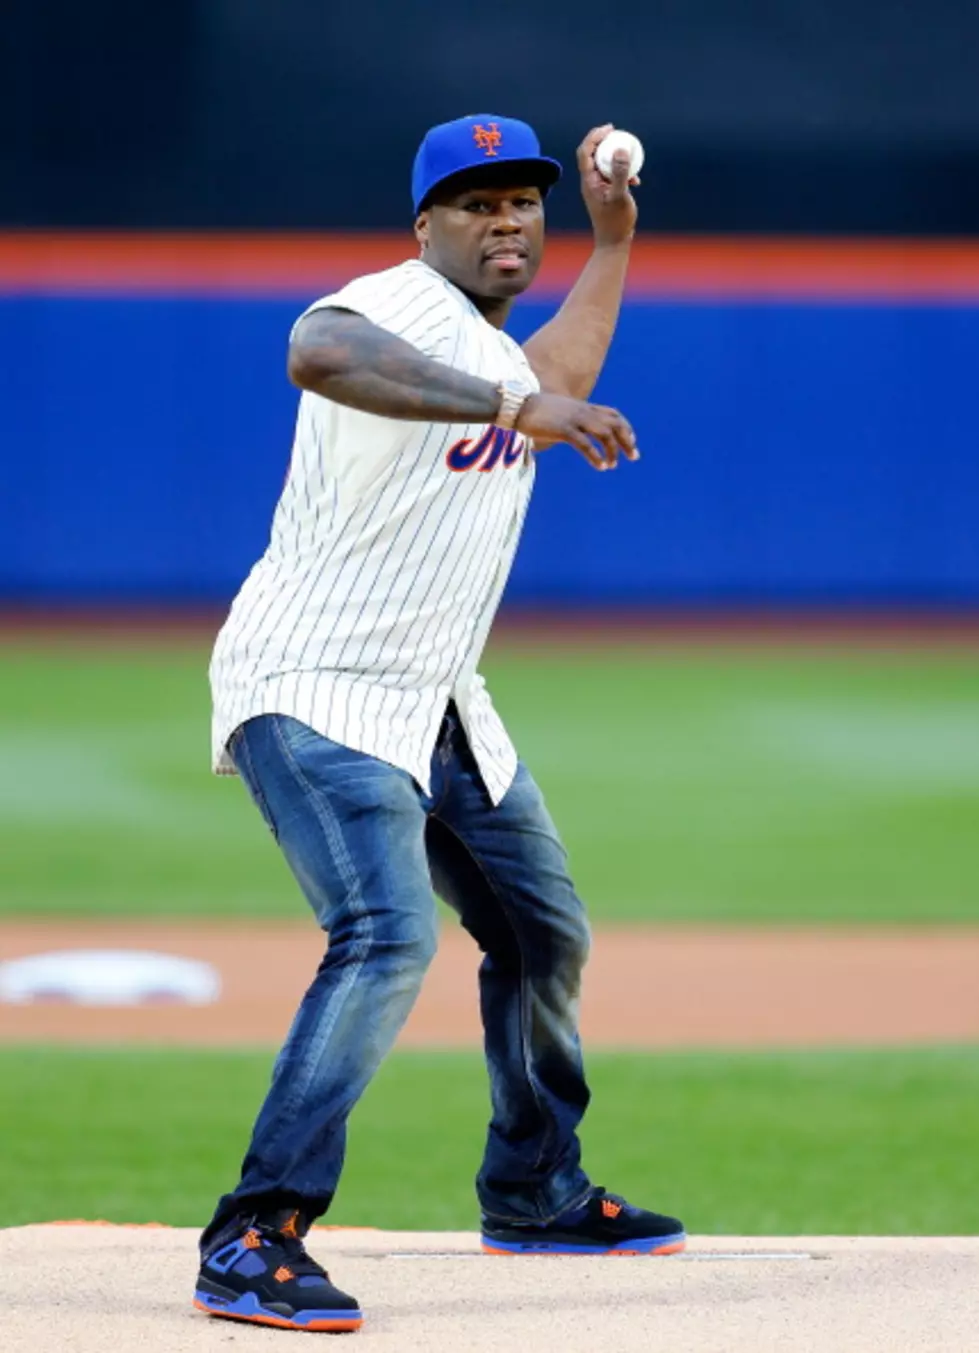 50 Cent and I Have Something In Common With The Mets [VIDEO]